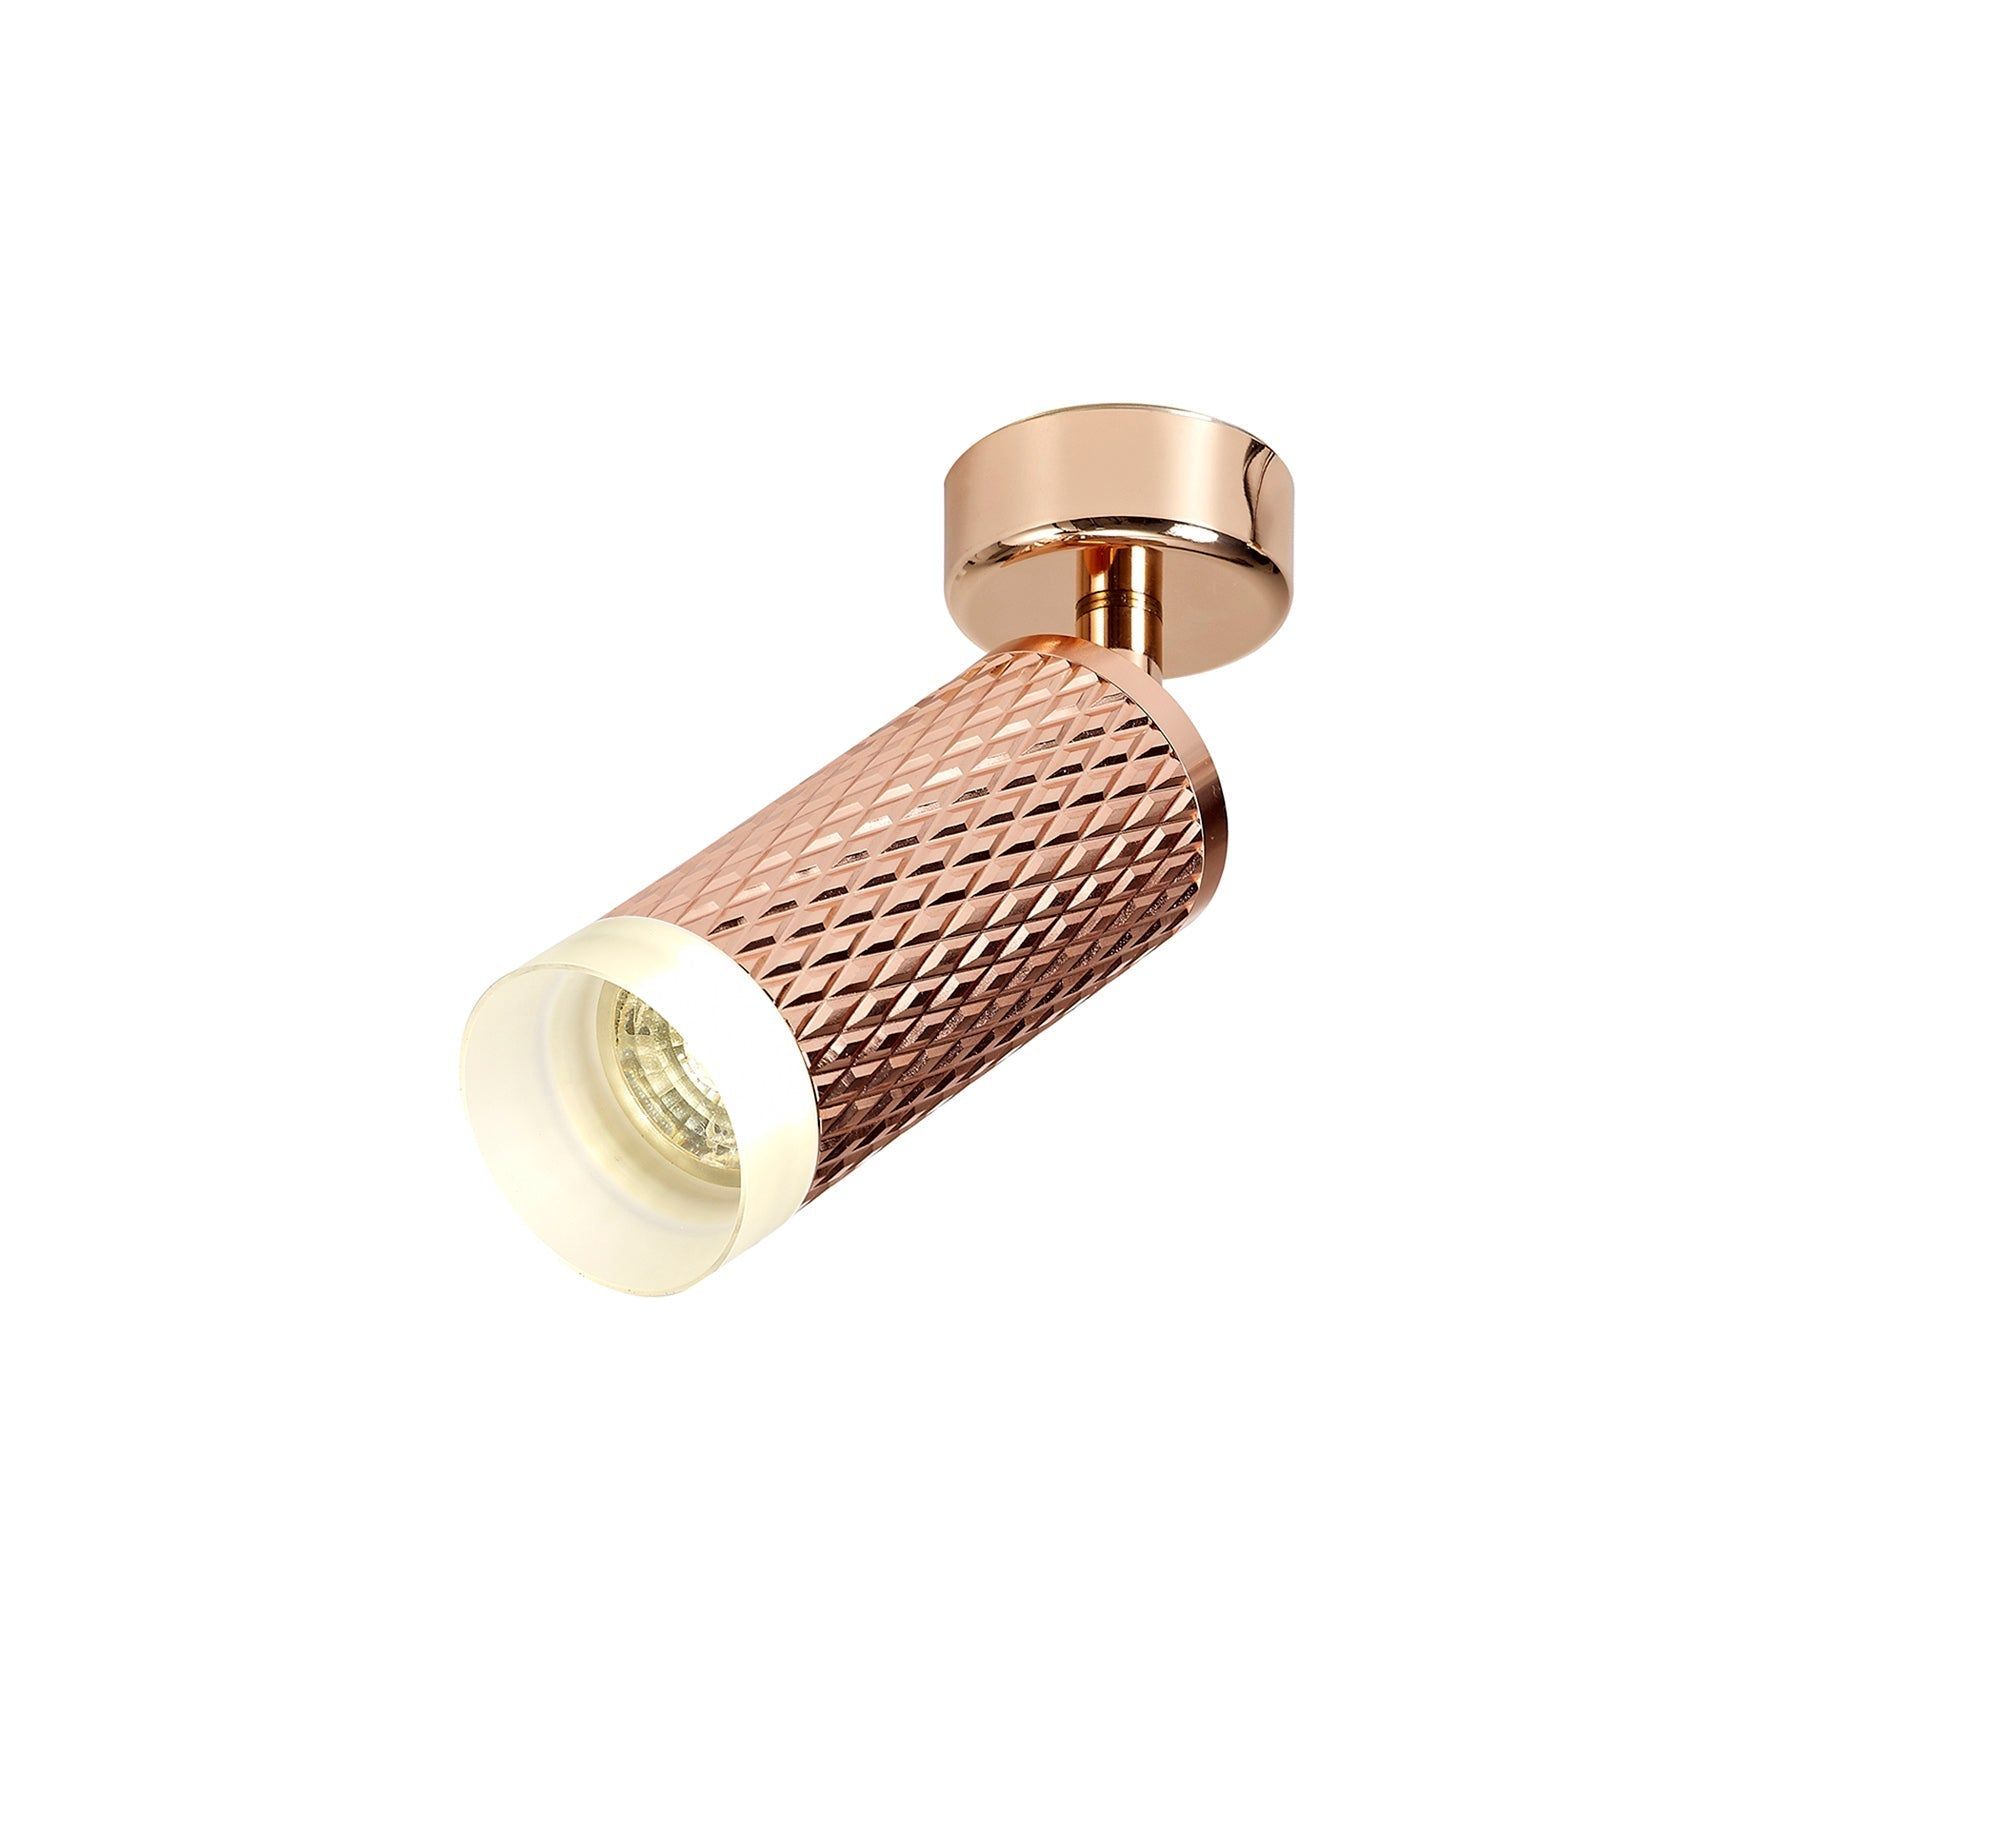 Toihian Adjustable 1 Light Surface Mounted Ceiling/Wall Spot Light  GU10, Champagne Gold/Acrylic Ring